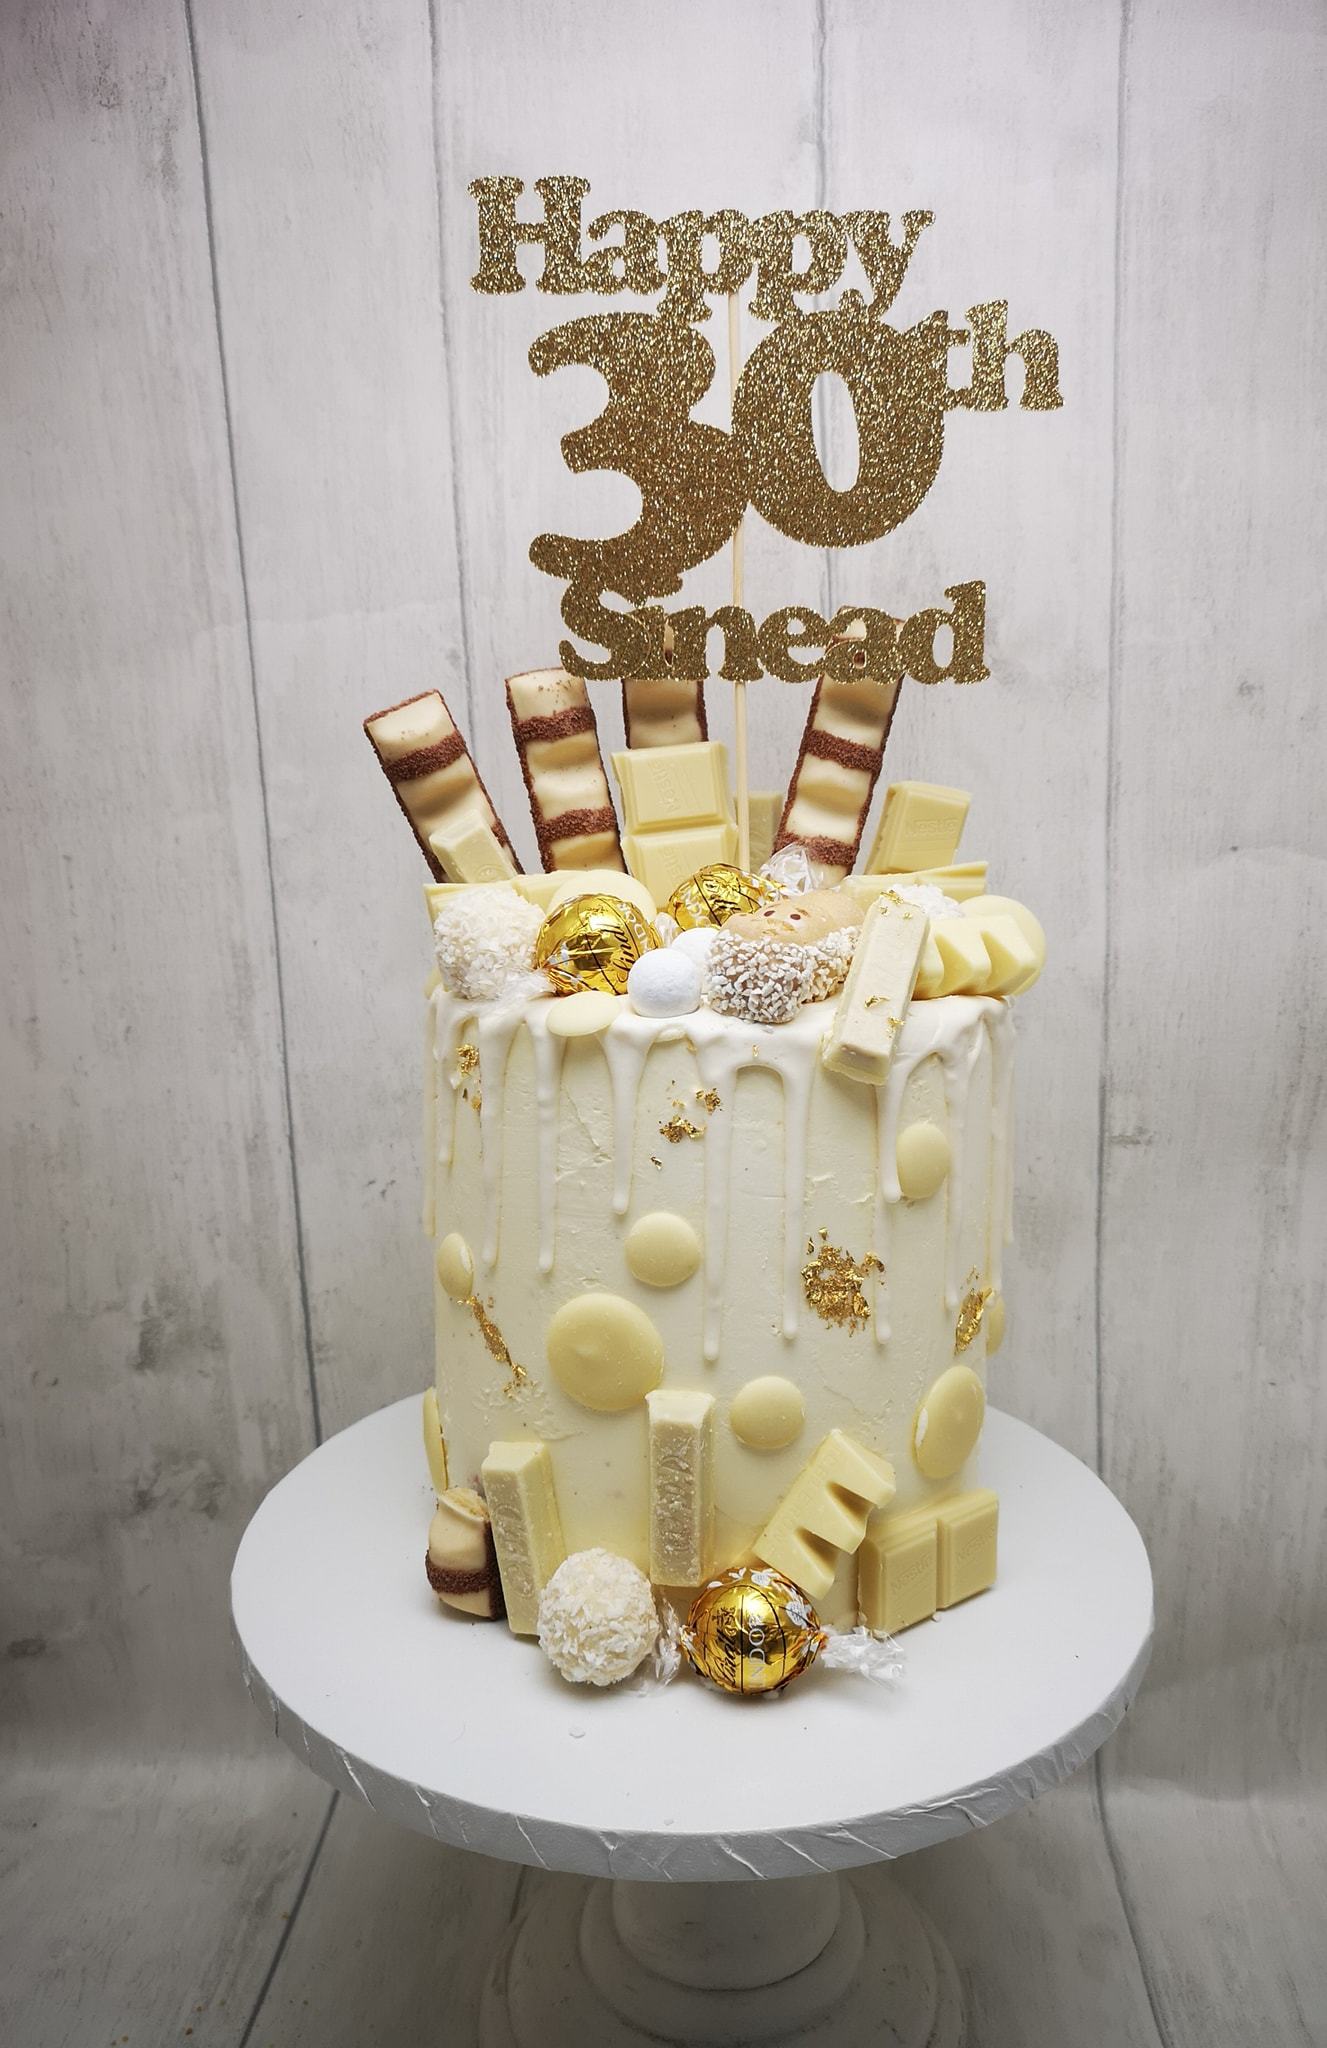 30th-birthday-cake-ideas-for-women-leanne-markham-on-twitter-disney-how-cool-is-my-30th